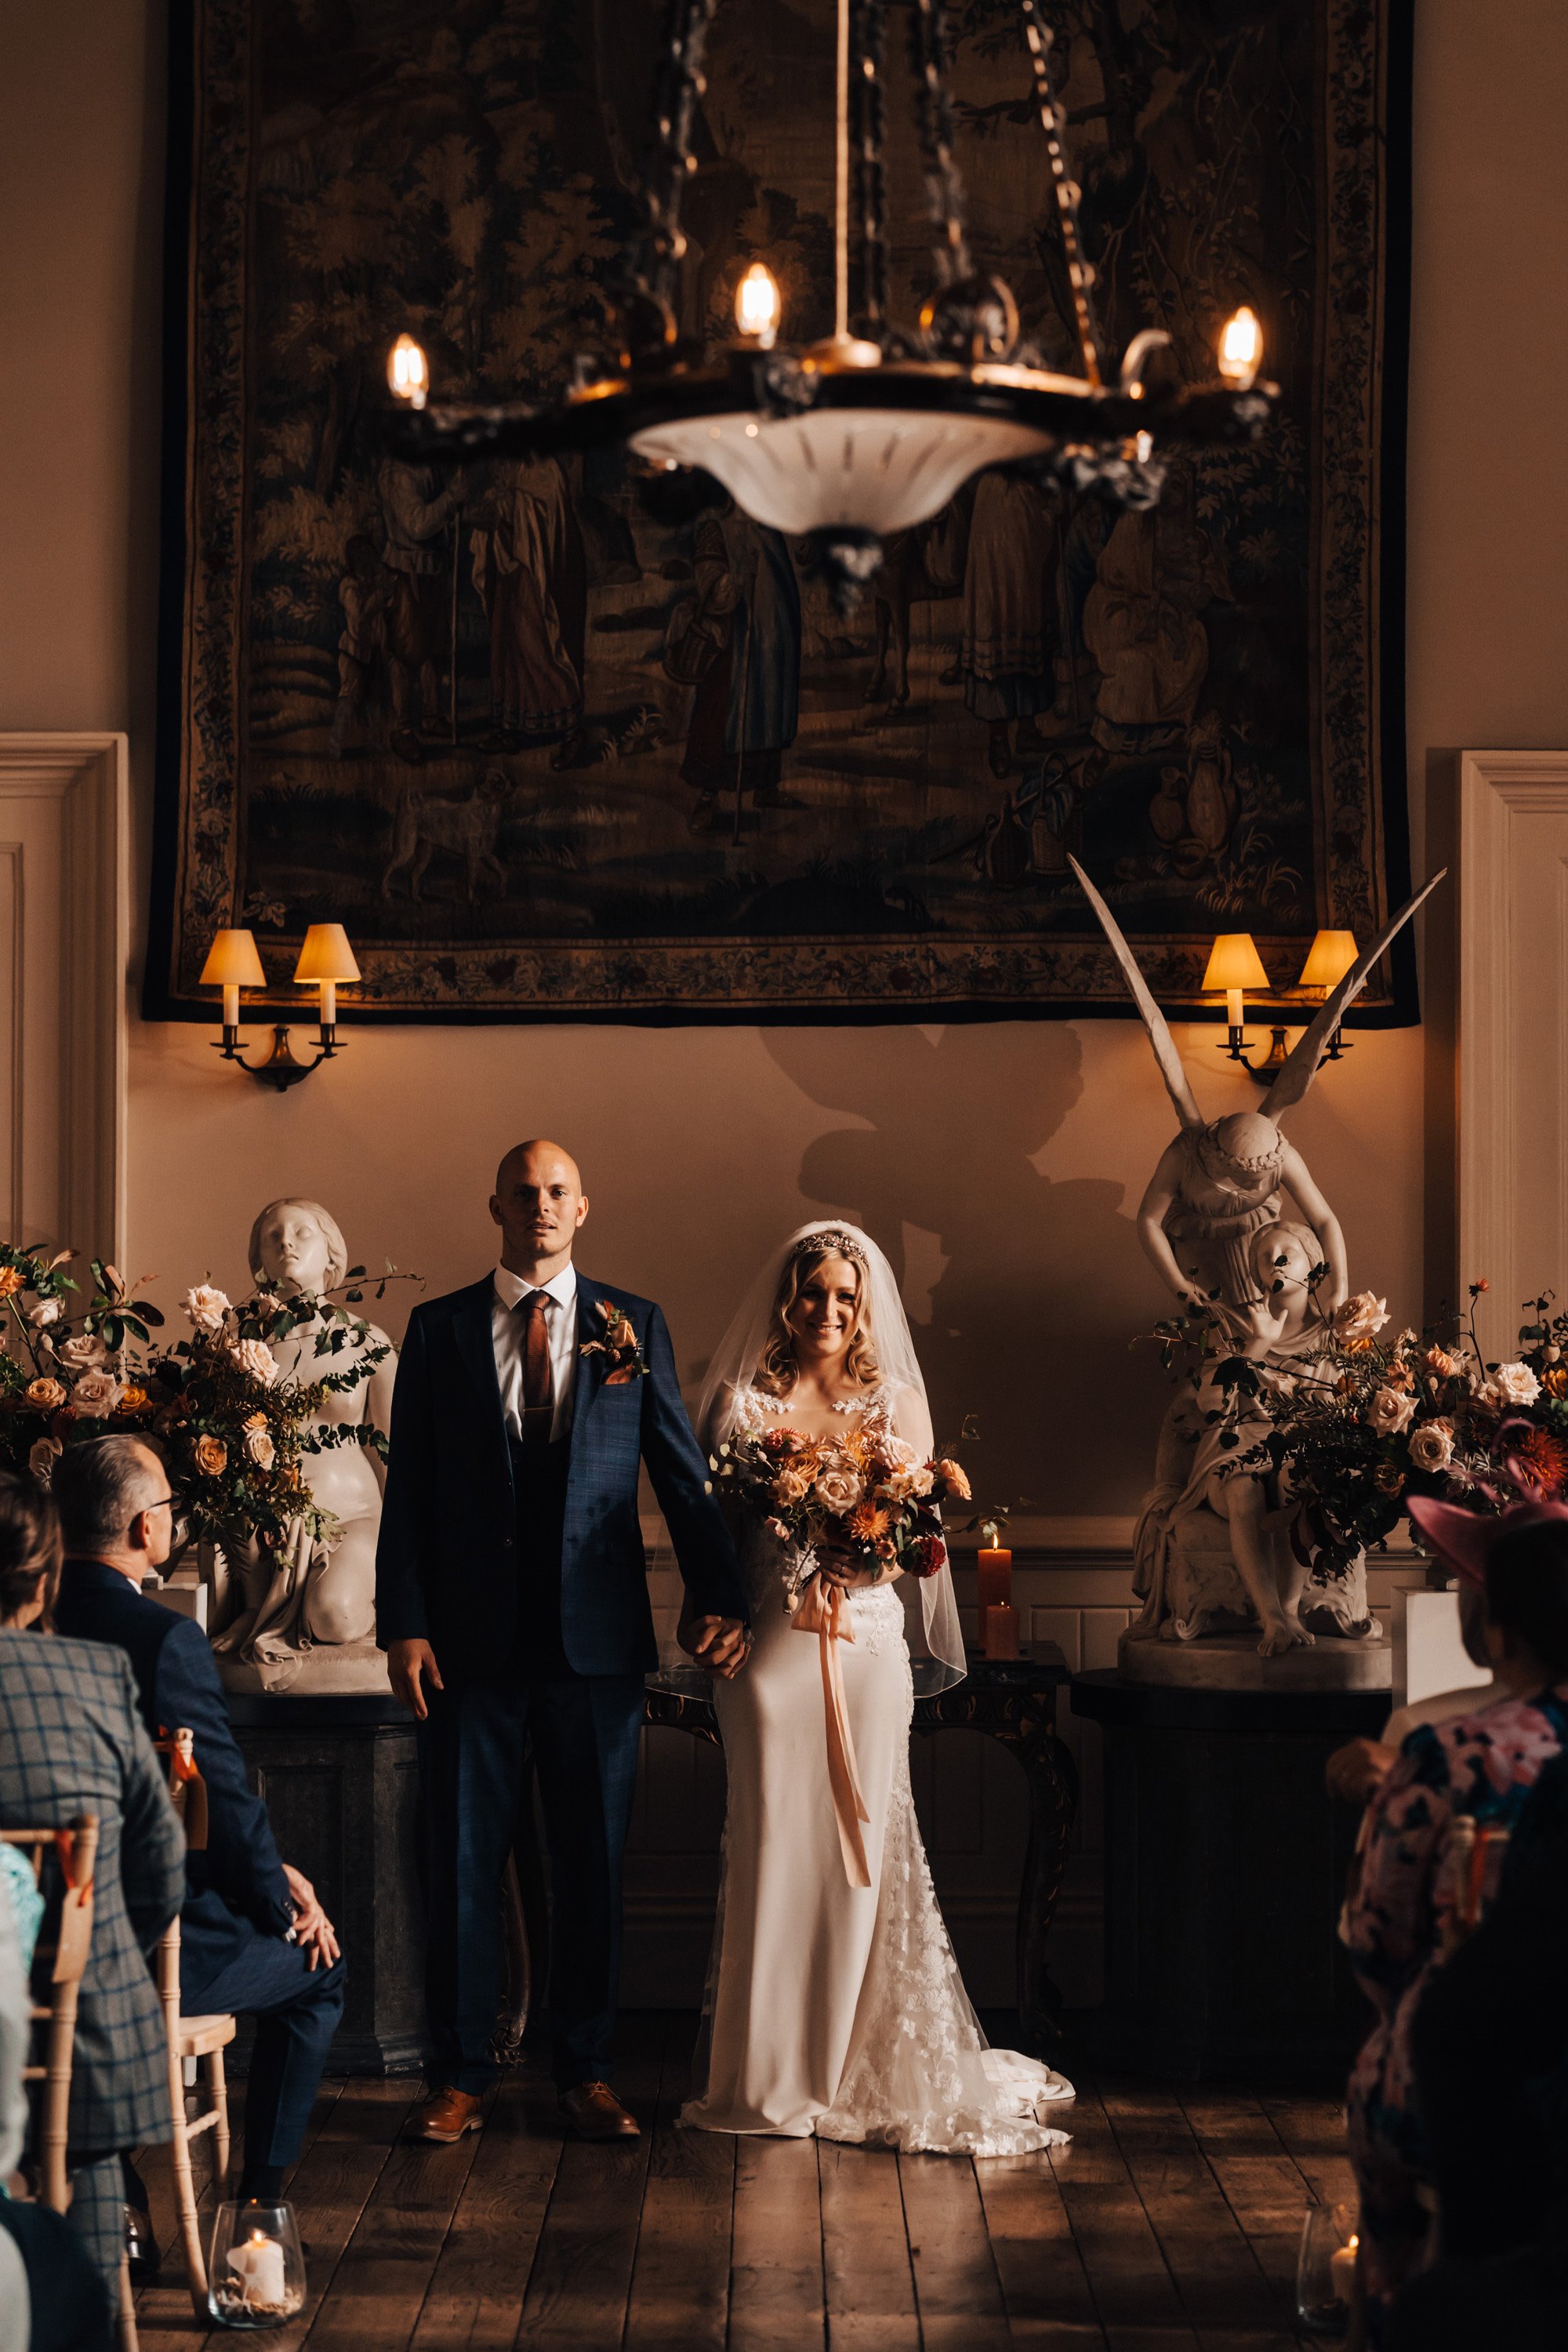 Bride and groom at beautiful autumnal wedding ceremony in a manor house in gloucestershire